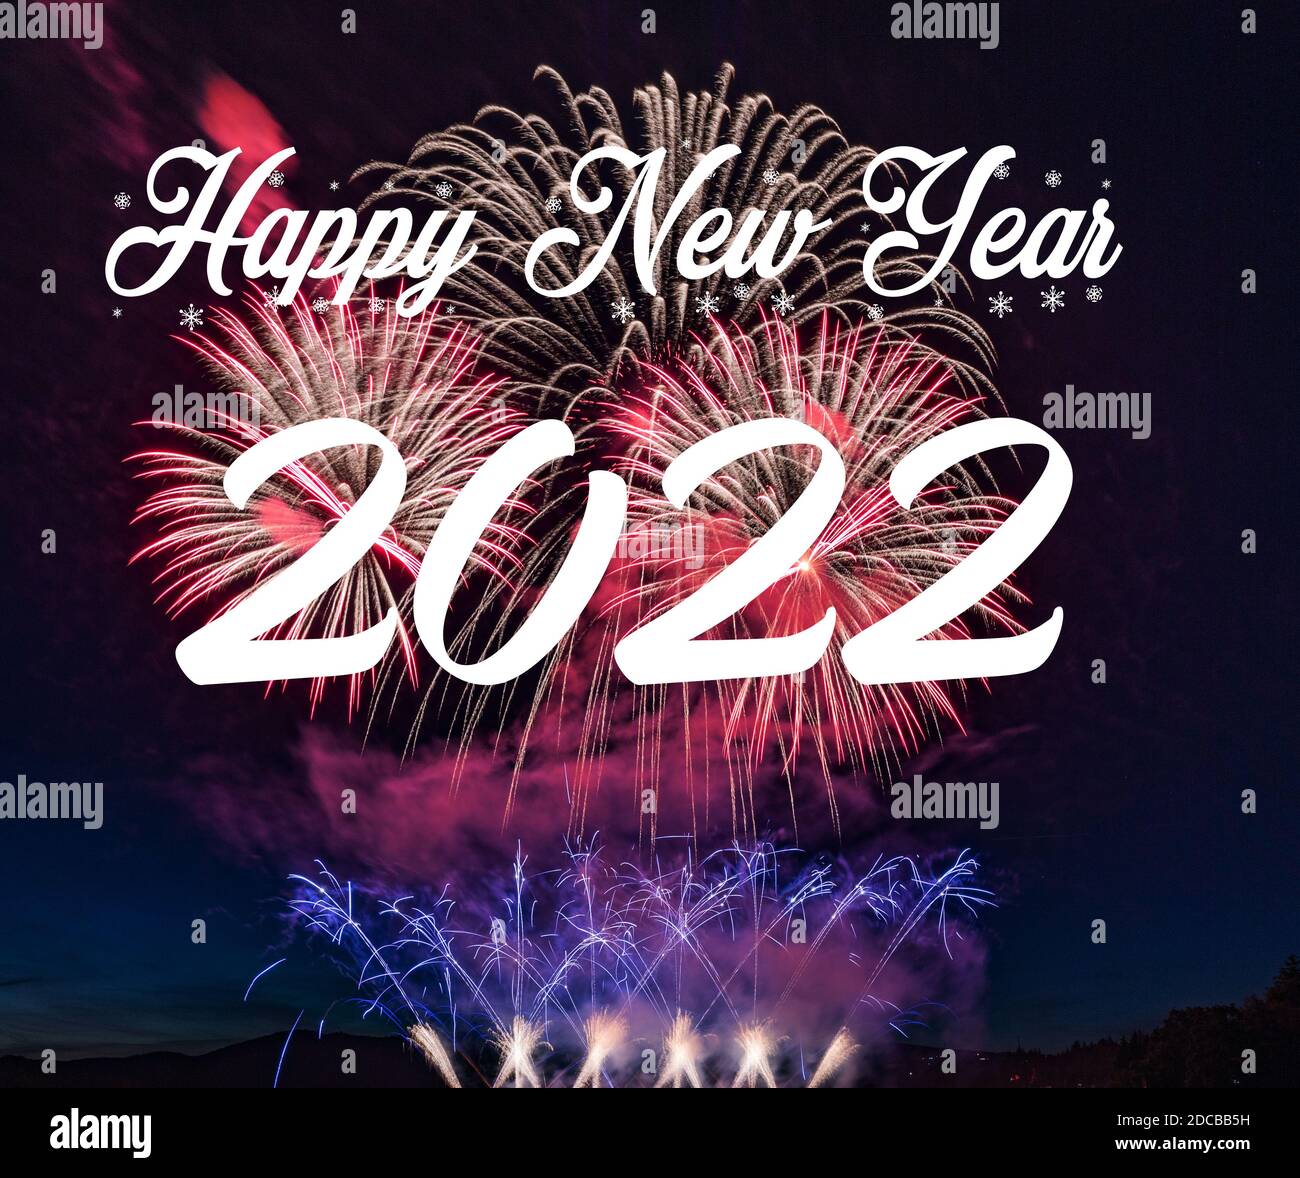 2022 New Year Hd Images